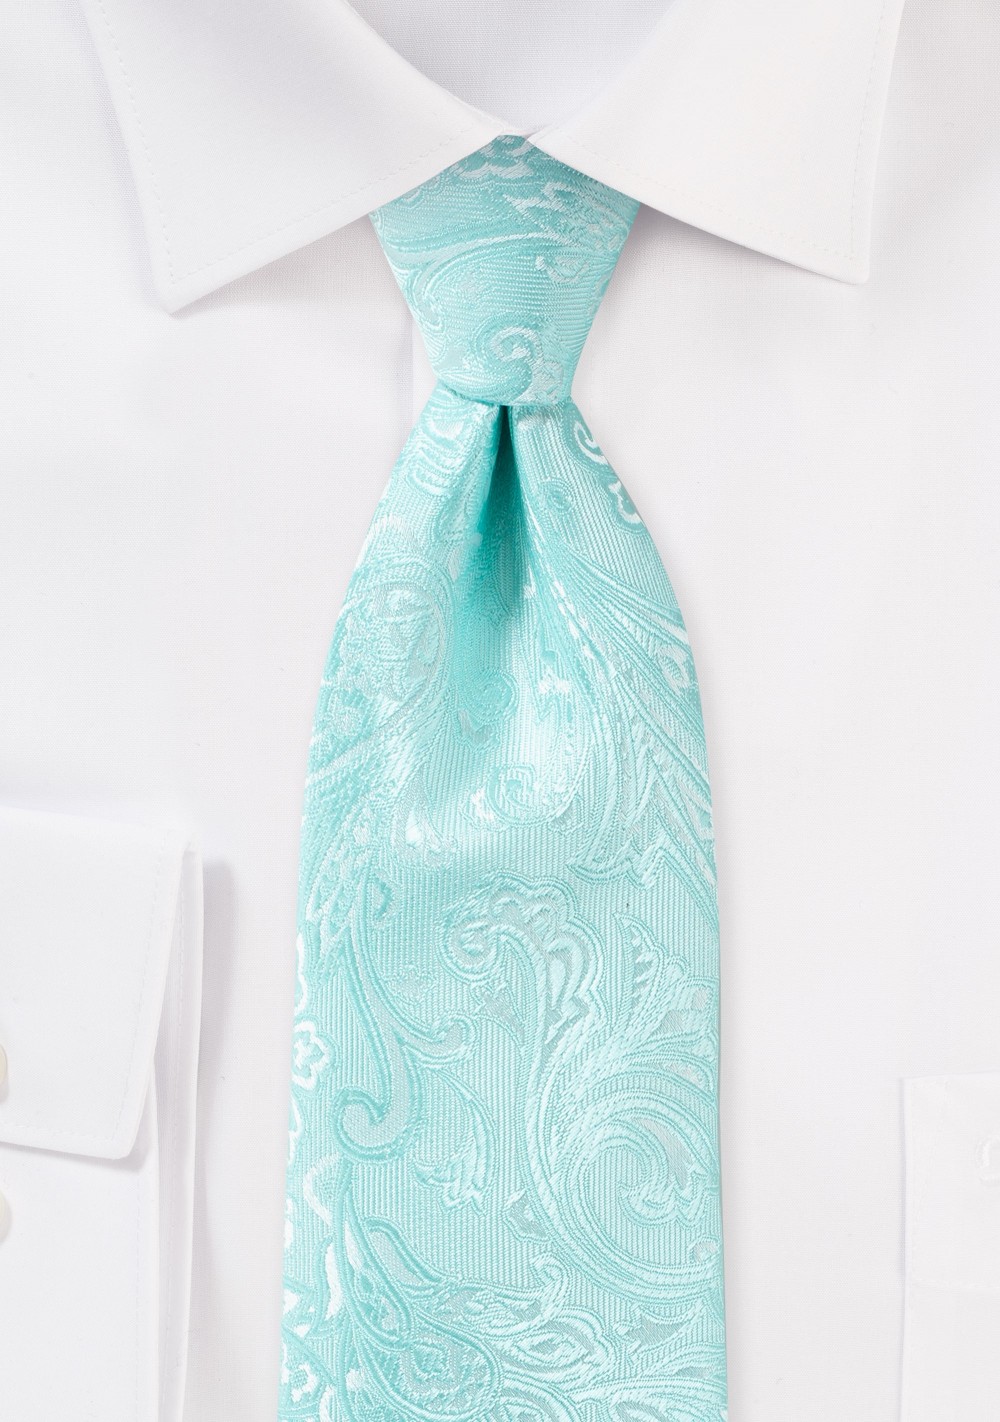 Robins Egg Blue Paisley Tie in XL